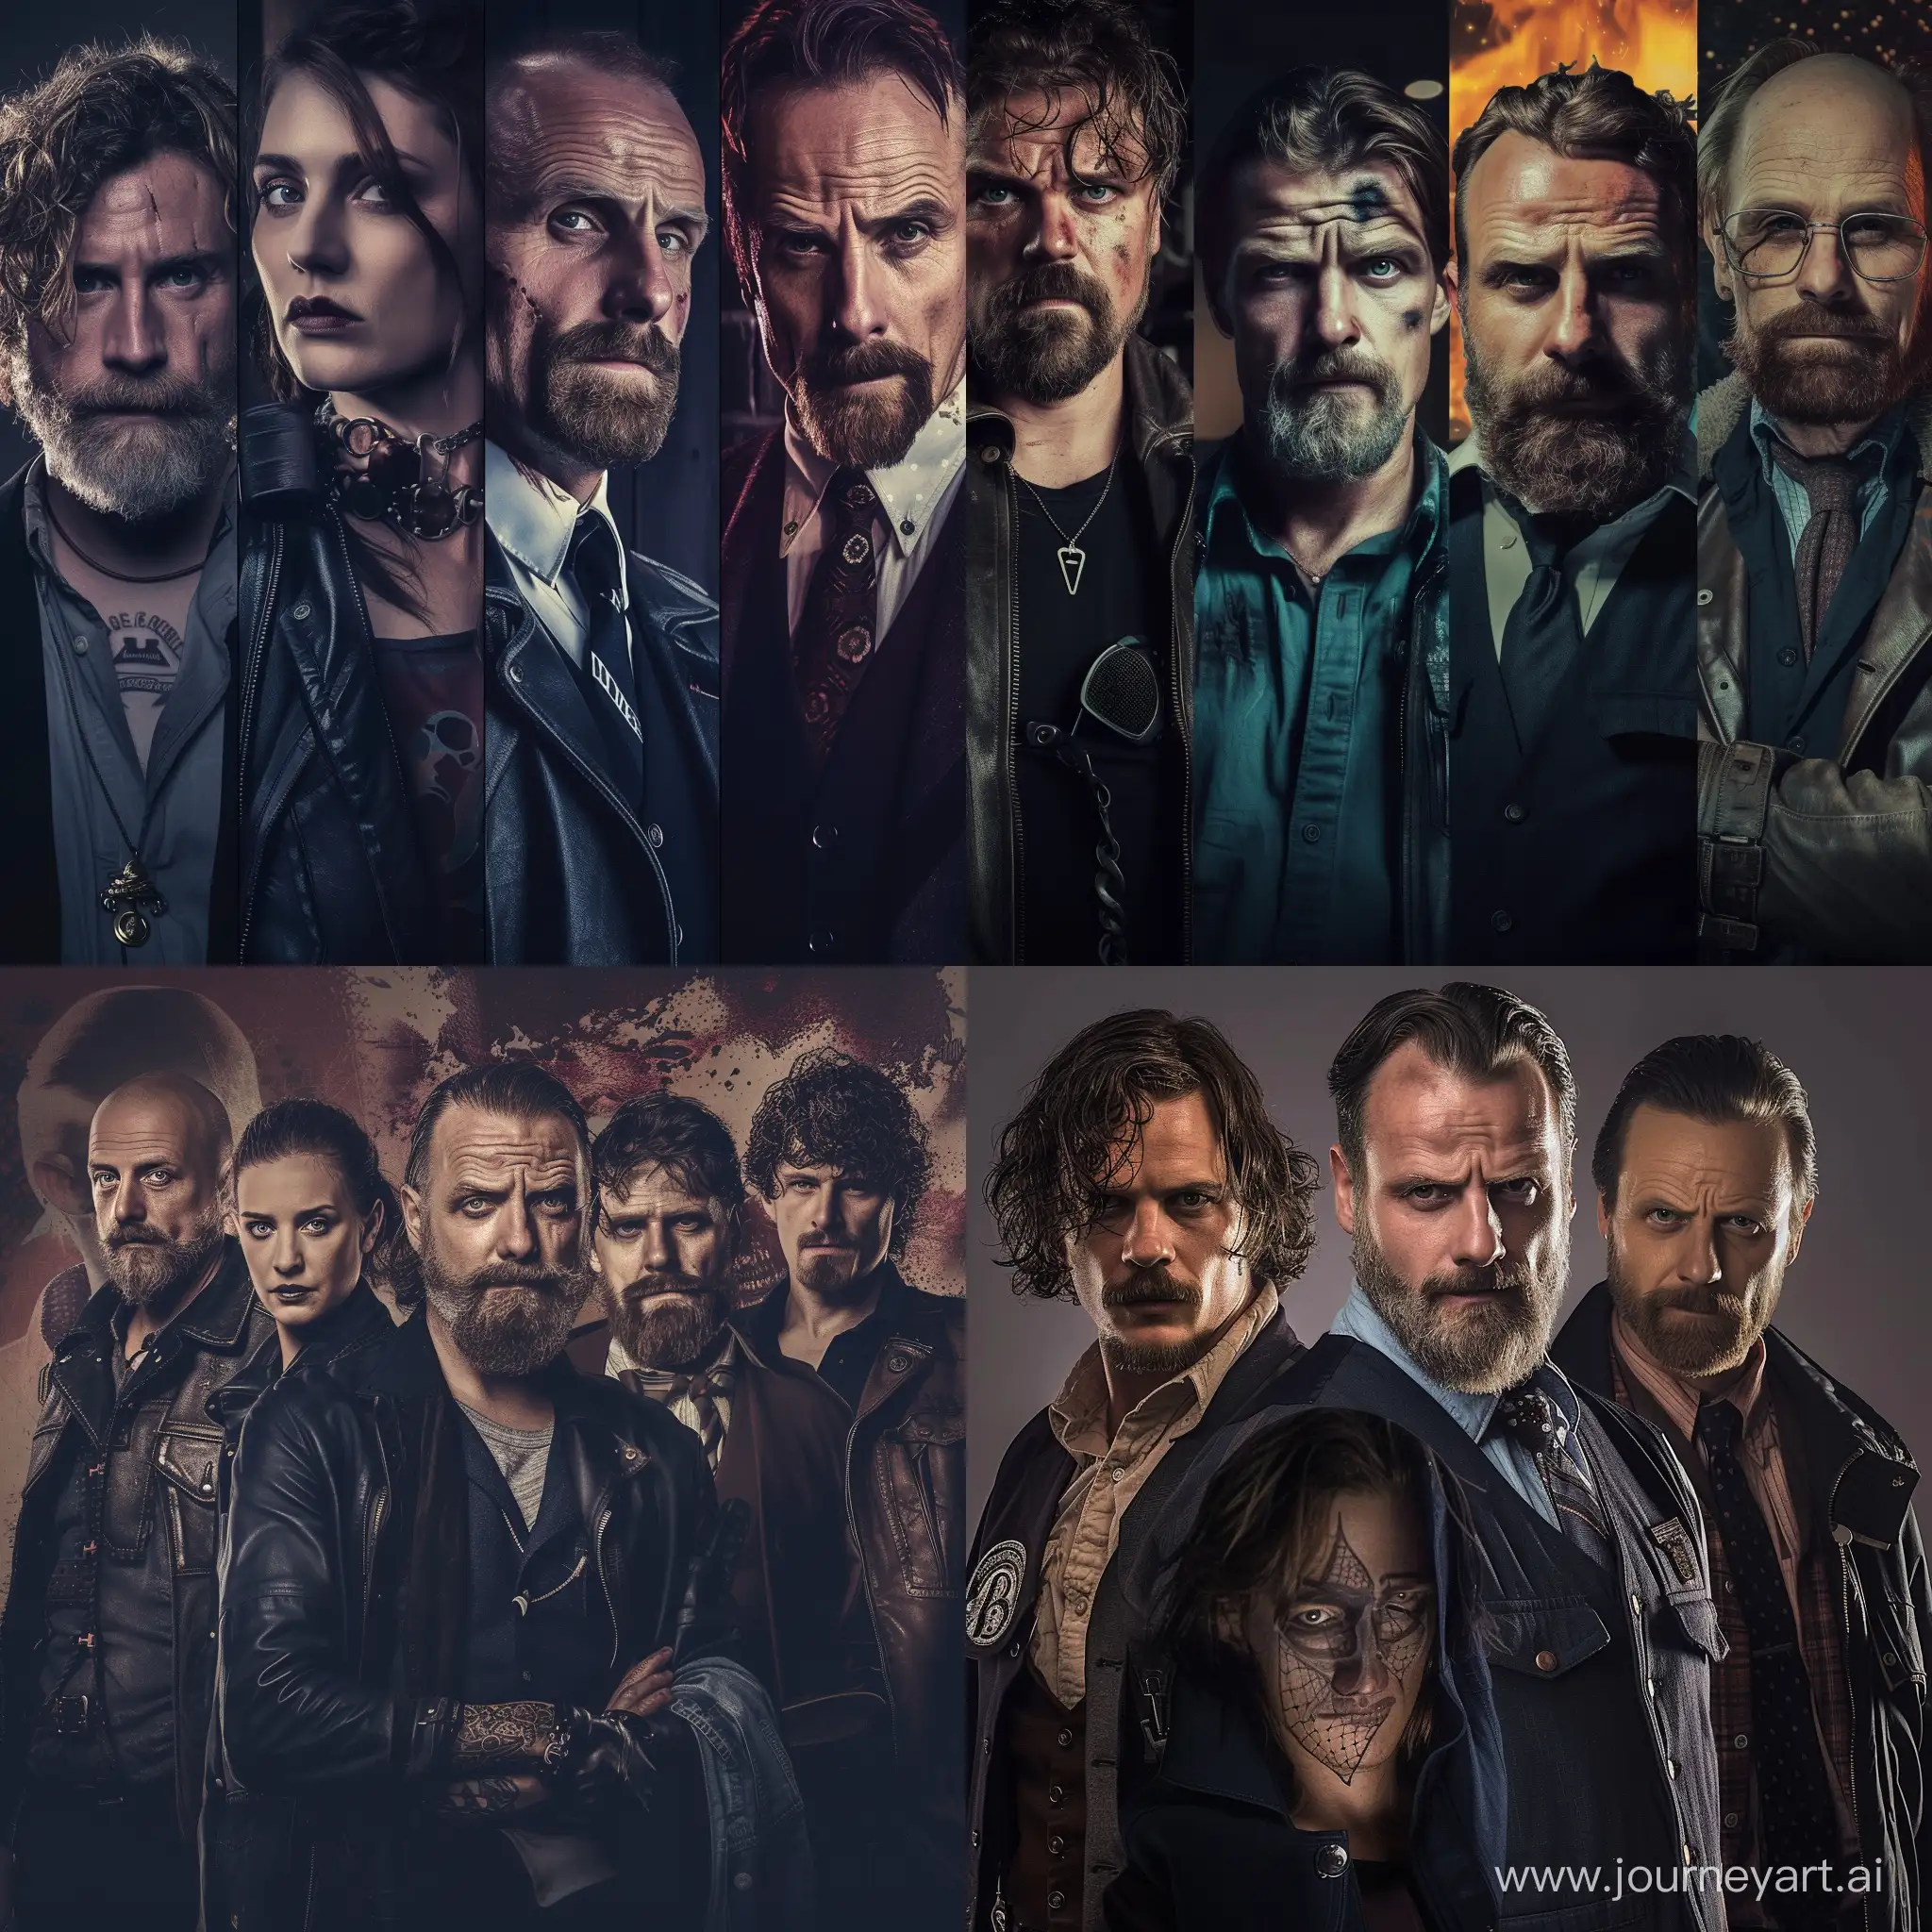 create a wallpaper of main character of the sons of anarchy, walking dead, peaky blinders, breaking bad main actors standing next each other each series with its own theme don't mix